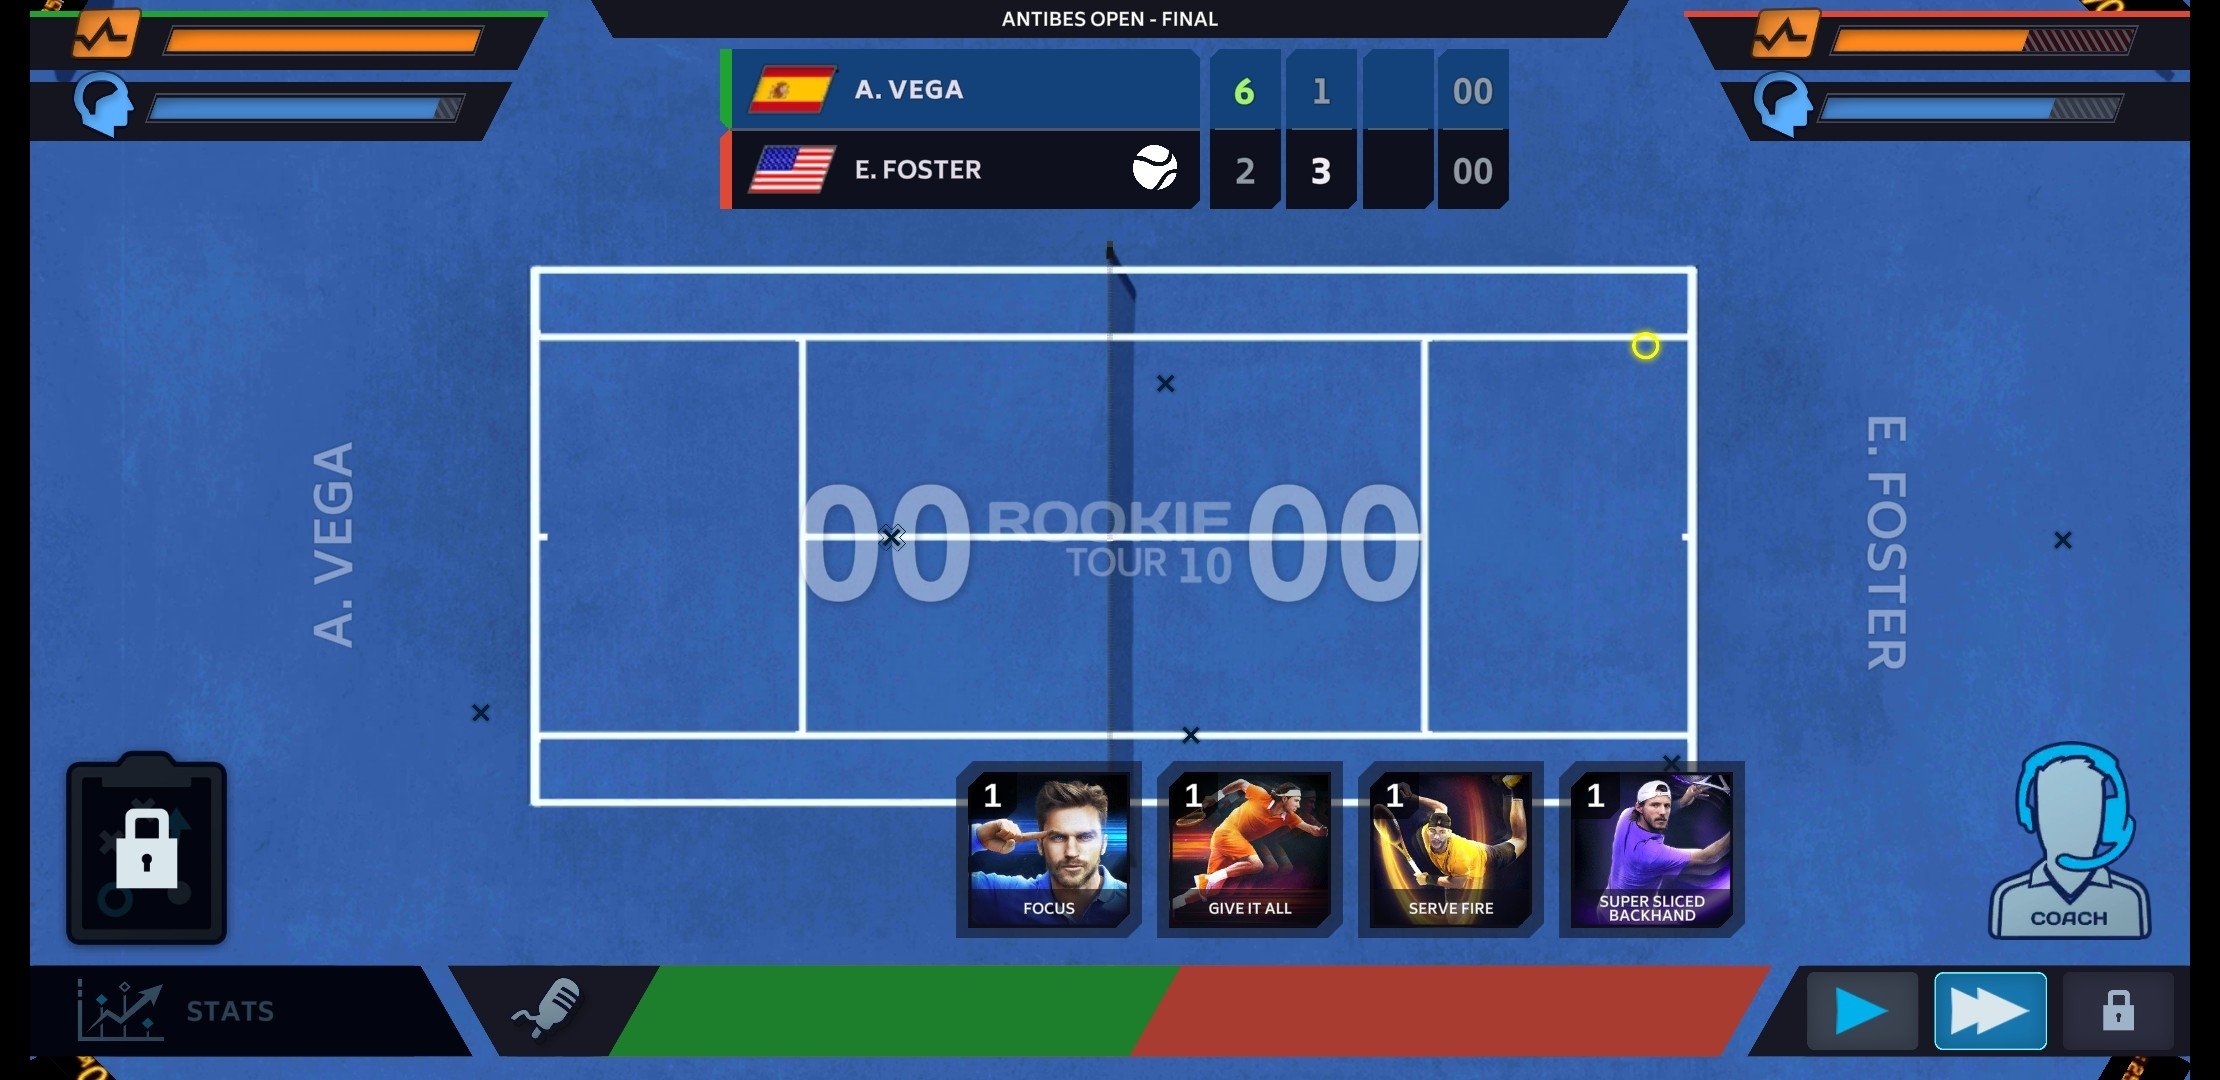 Tennis Manager 2021 1.29.5579 - Download for Android APK Free